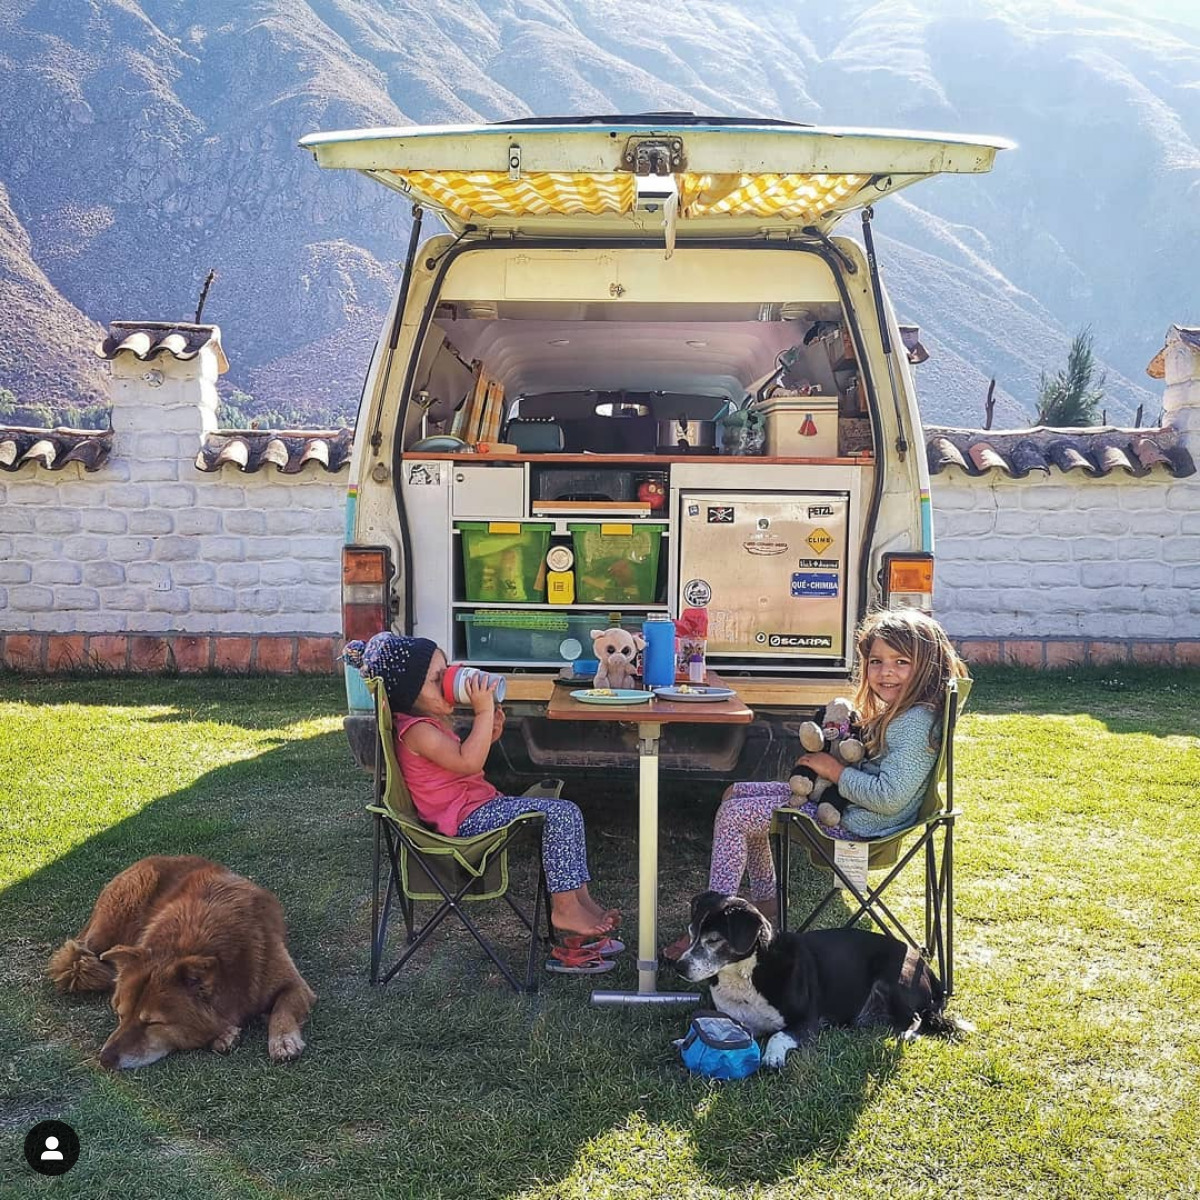 A camper van, a South American drive-about, and a picky eater – what could go wrong?